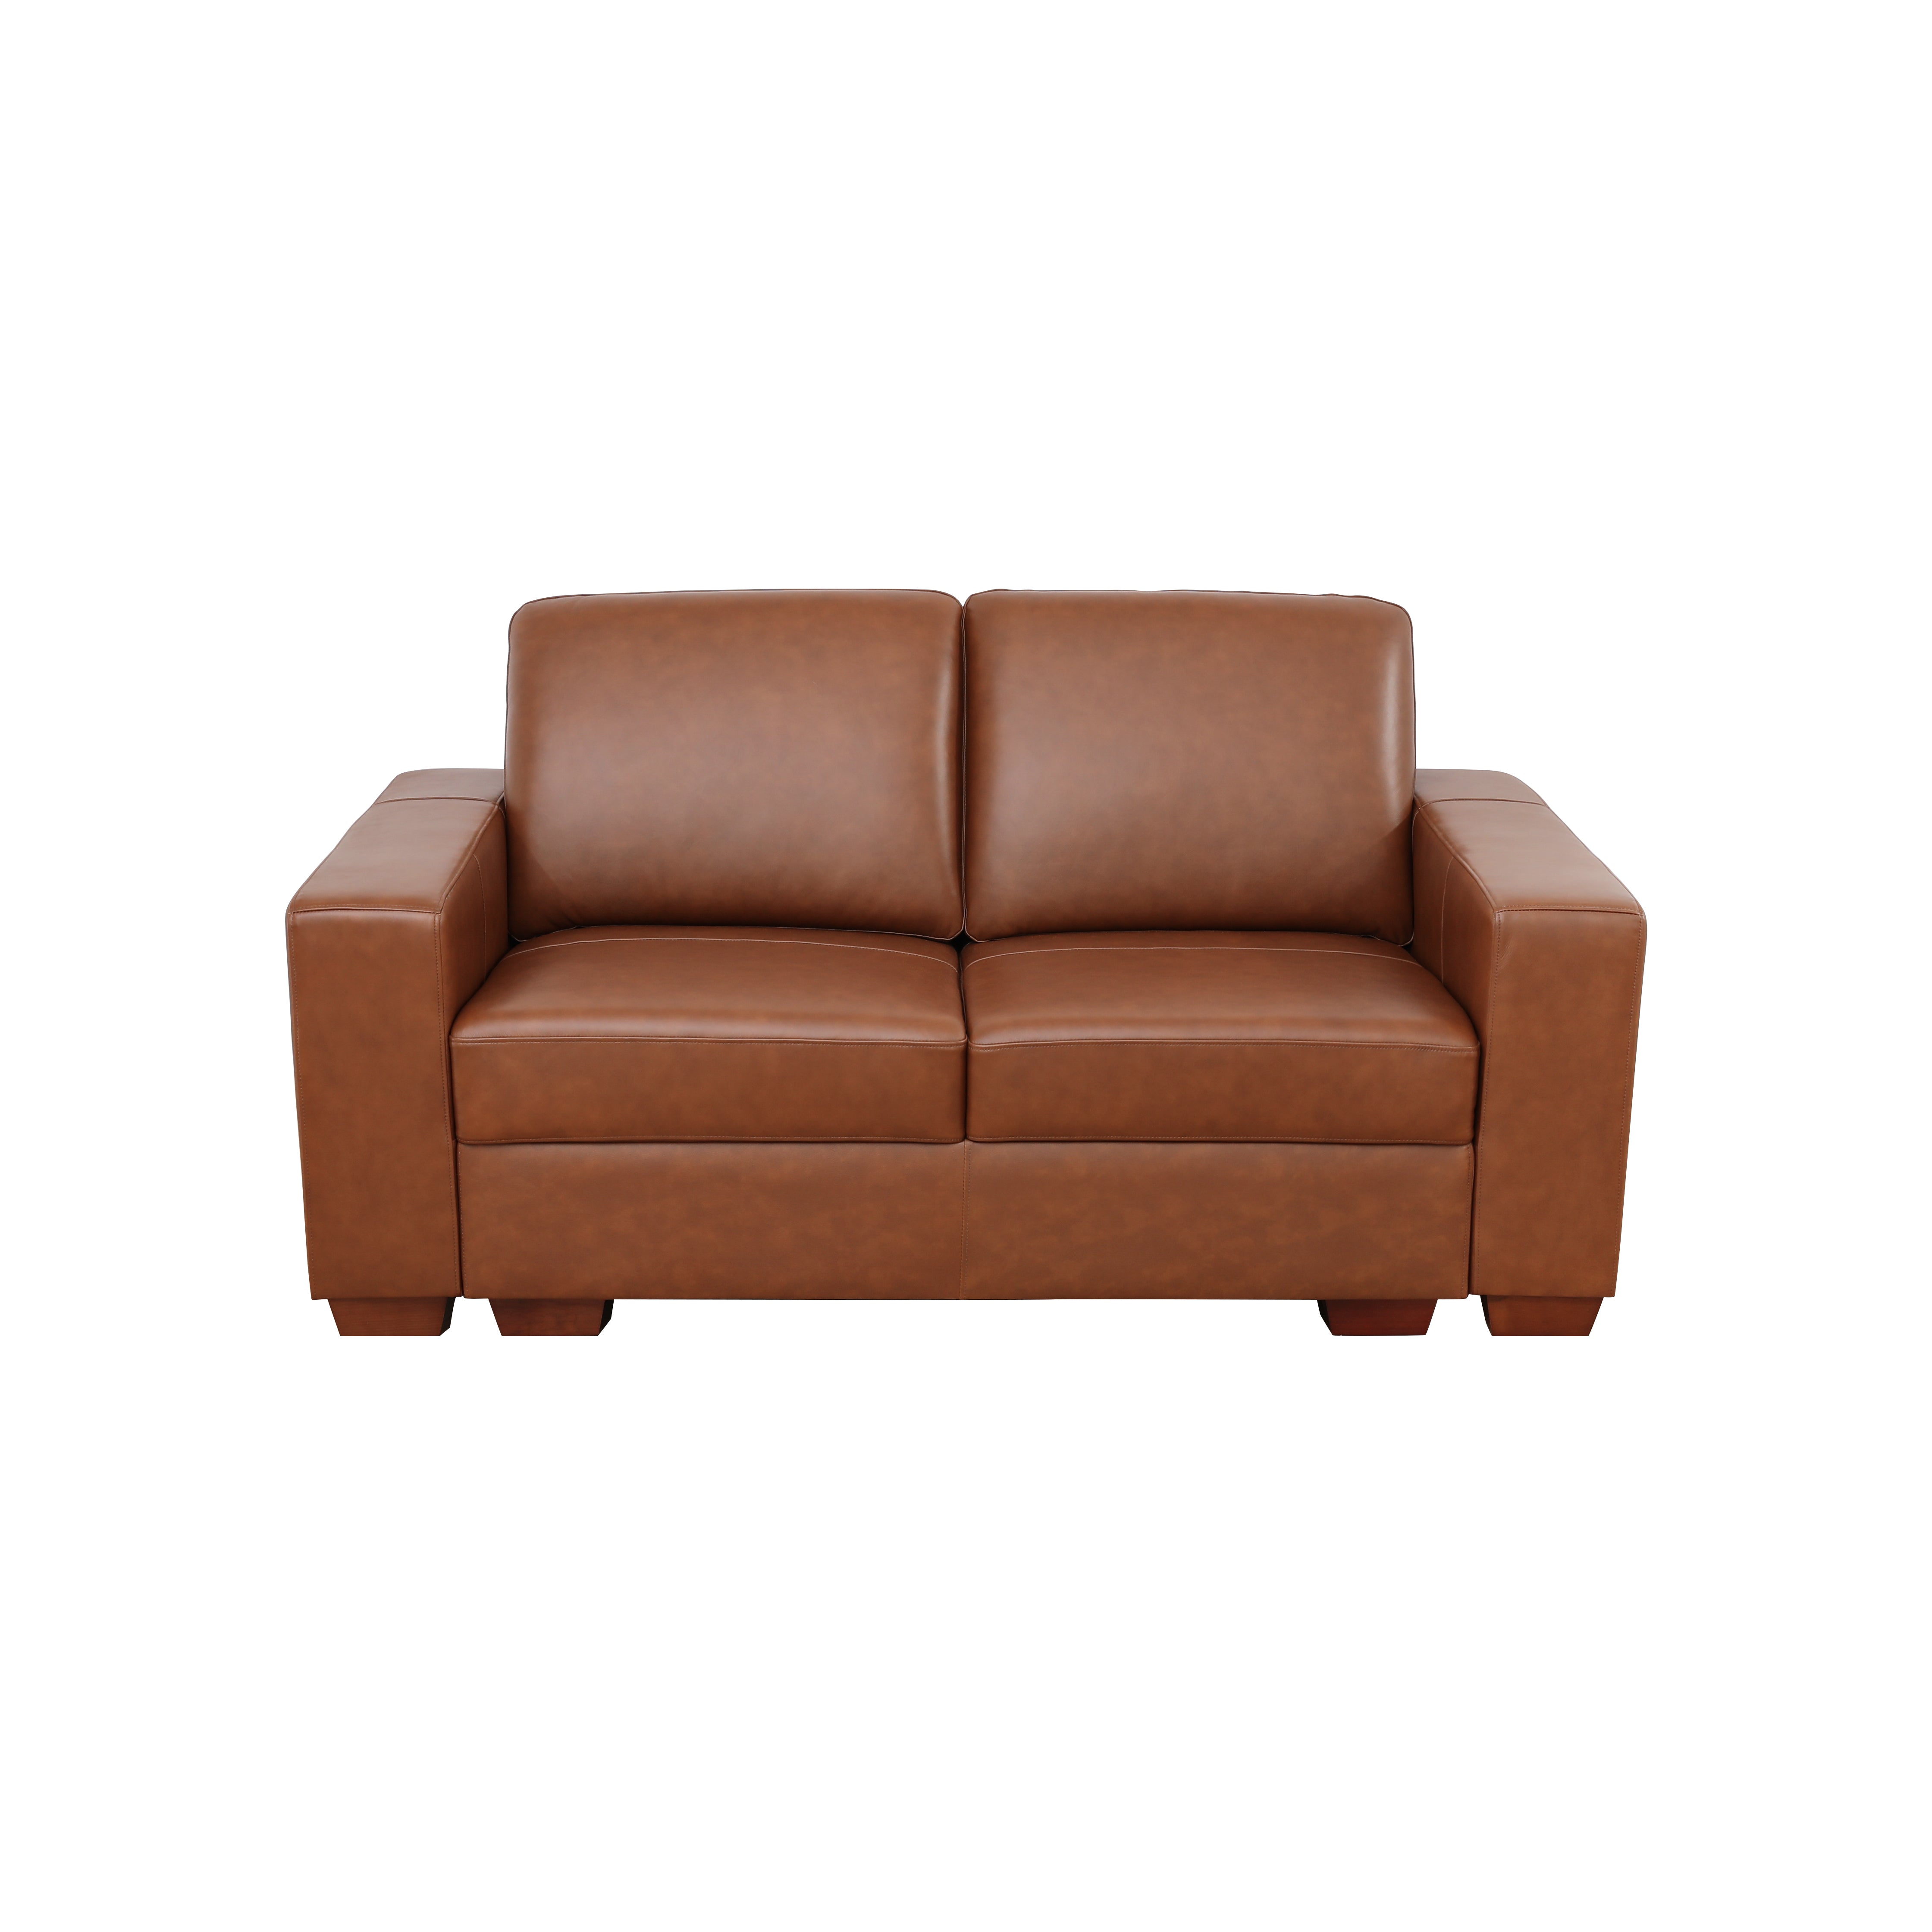 Ainehome Brown Top Cowhide 2+2+1 Combo Sofa and Chair Set